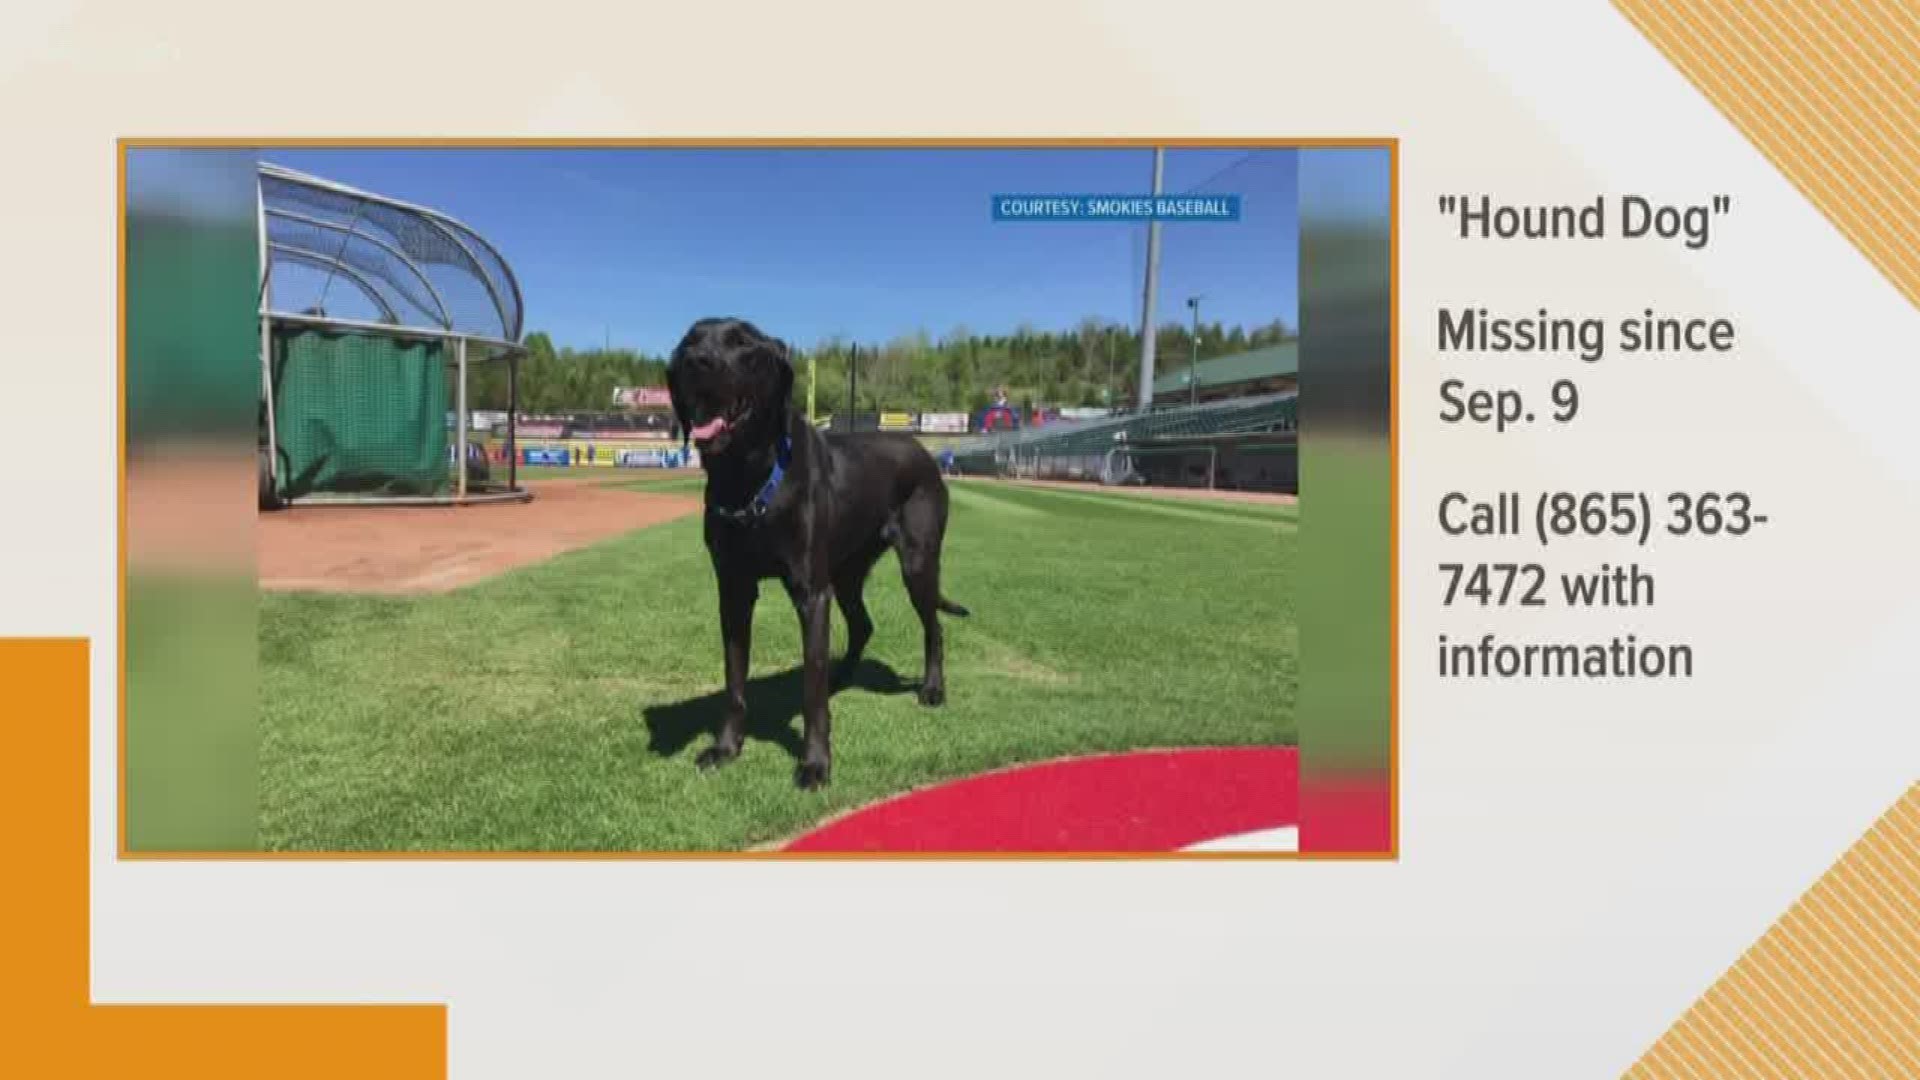 In Sevier County, the Tennessee Smokies are searching for their missing grounds dog. The baseball team says "Hound Dog" escaped the stadium on Monday.